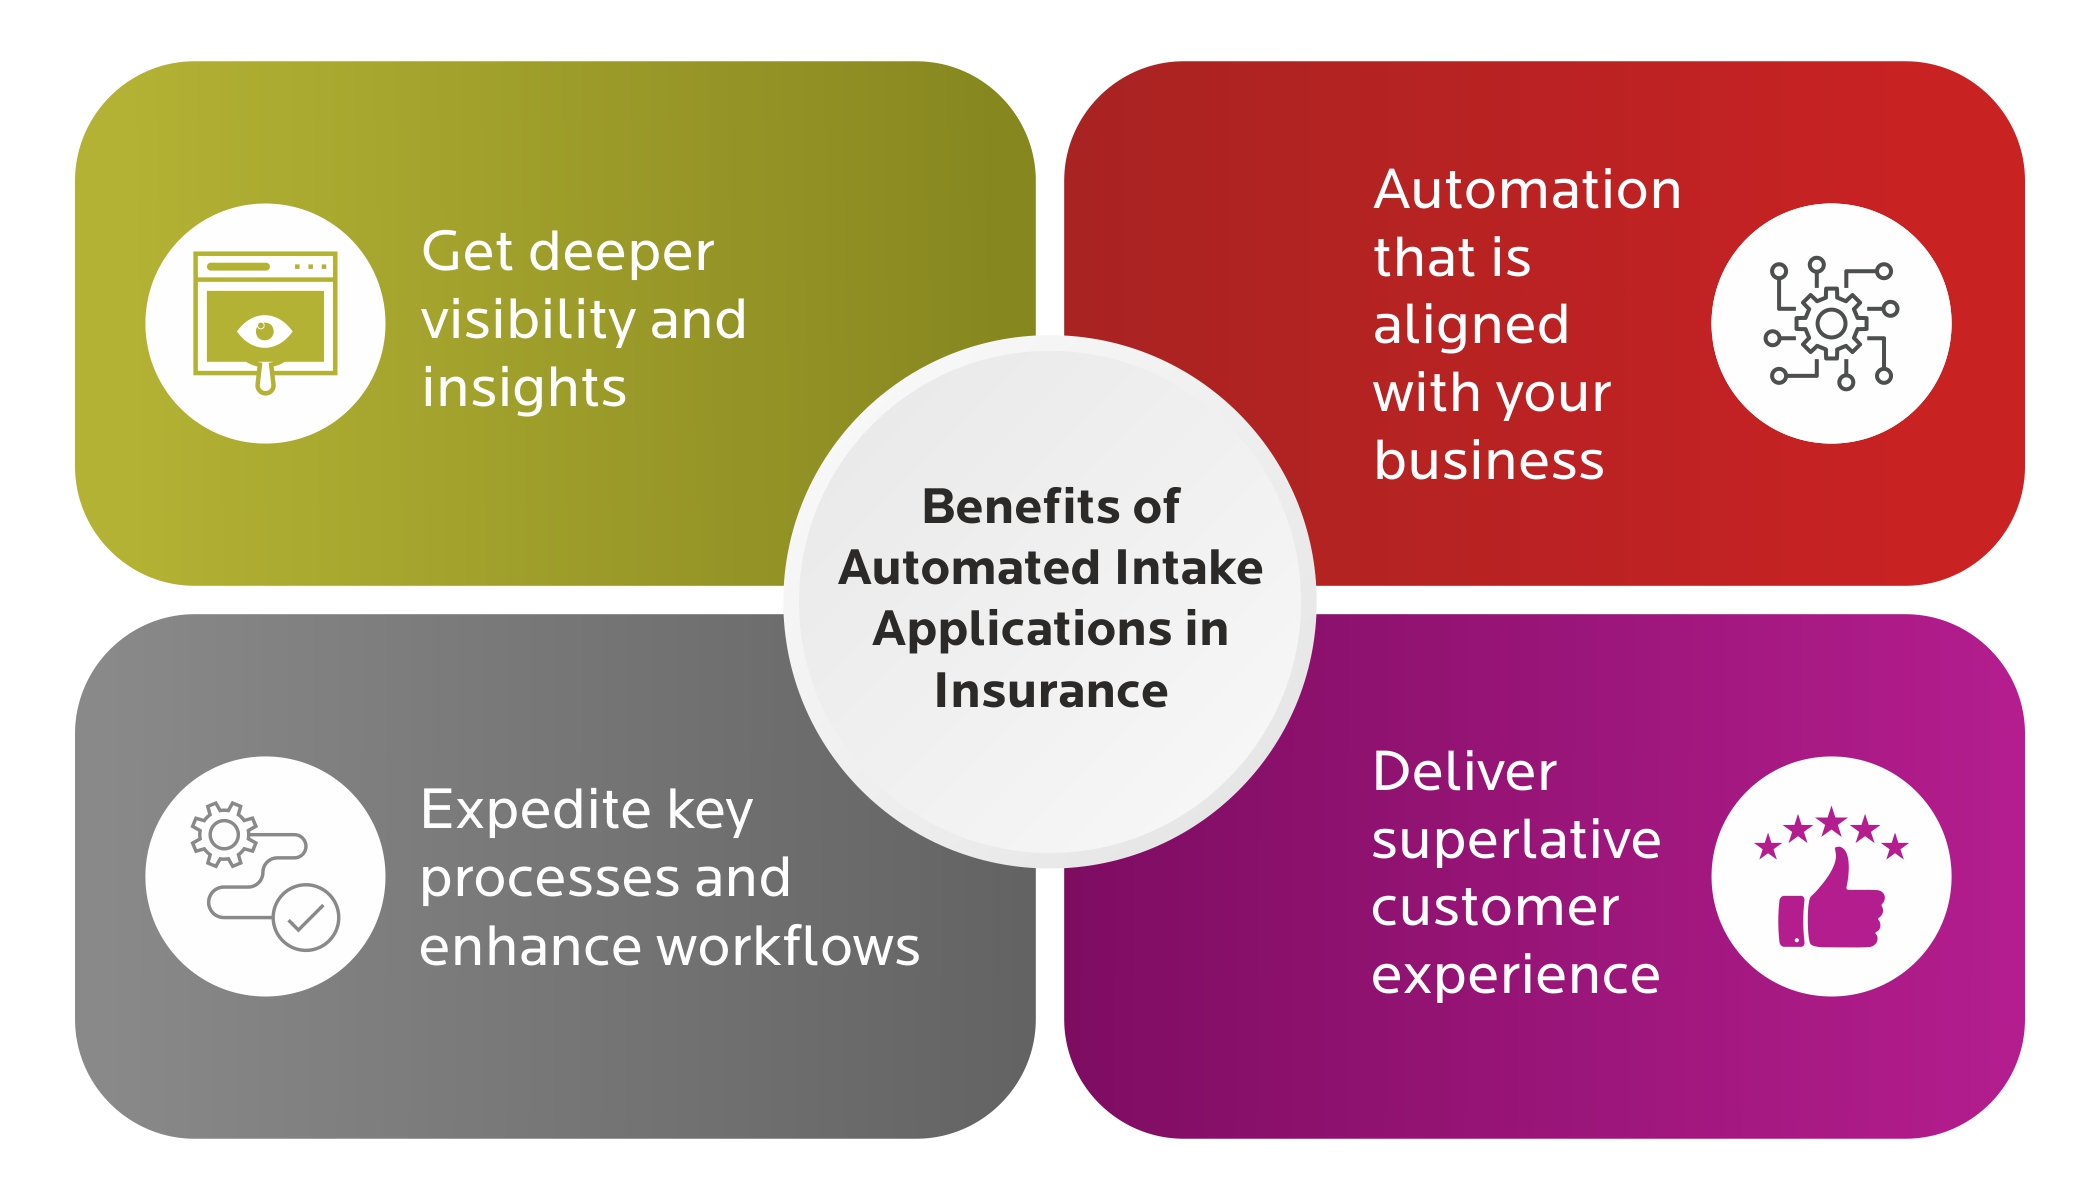 Benefits of Automated Intake Applications in Insurance